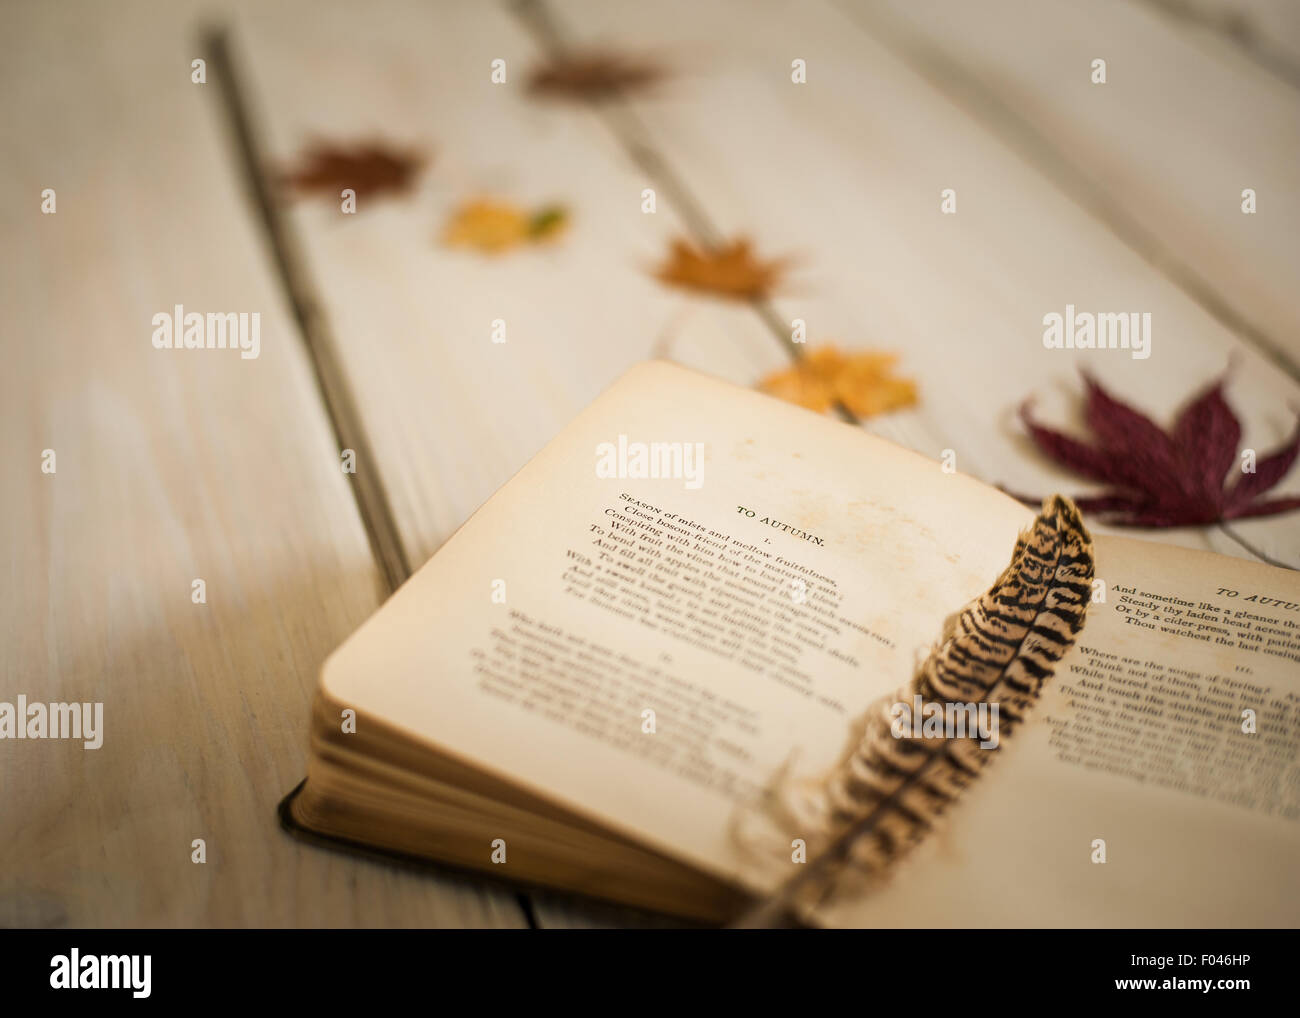 closeup of vintage book of poetry open on ode to Autumn by John Keats, with feather and autumn leaves Stock Photo